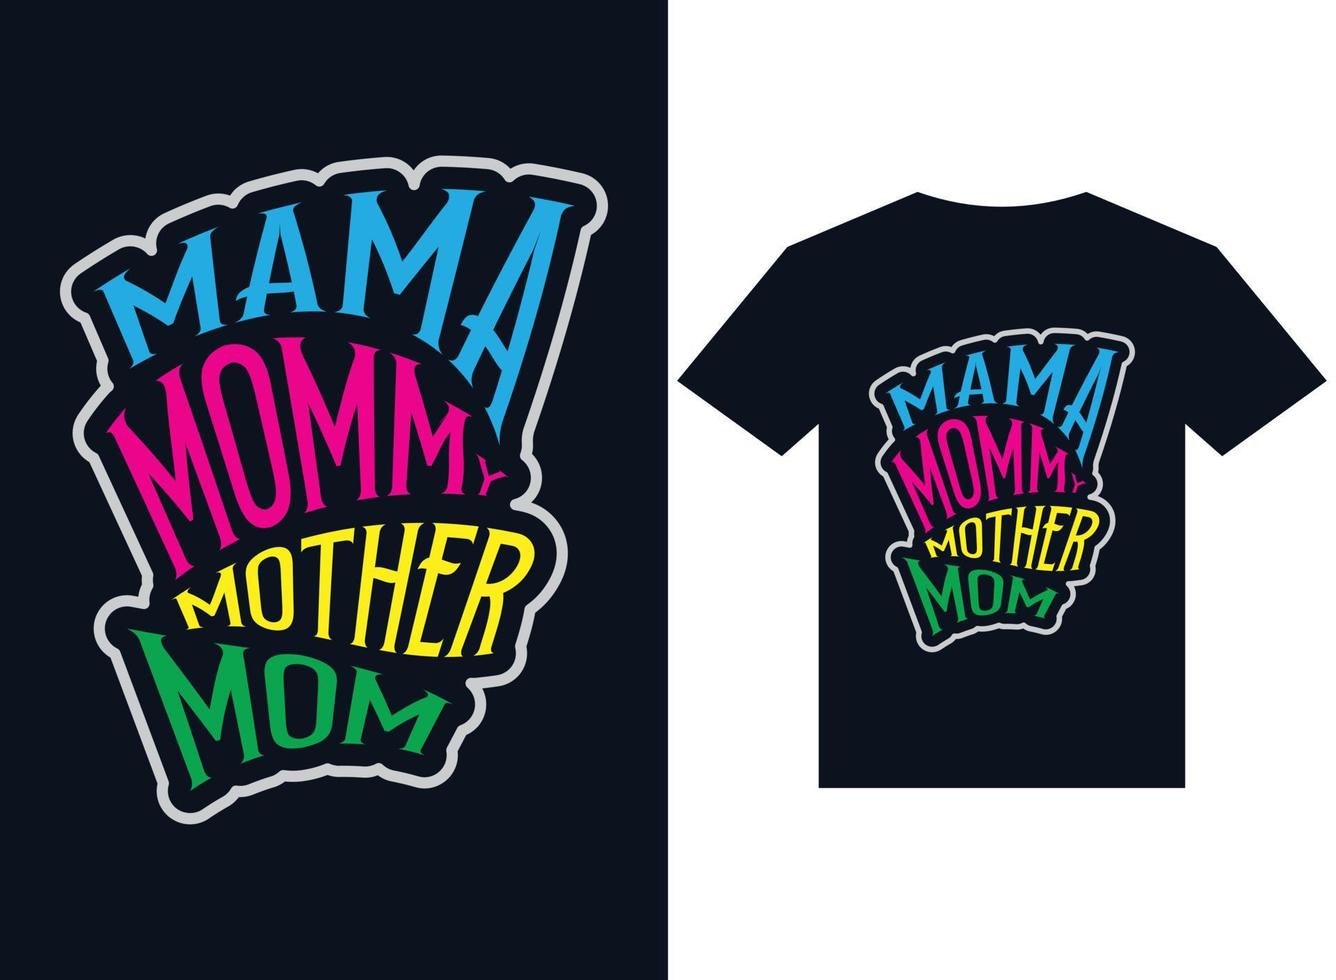 mama mommy mother mom t-shirt design typography vector illustration printing